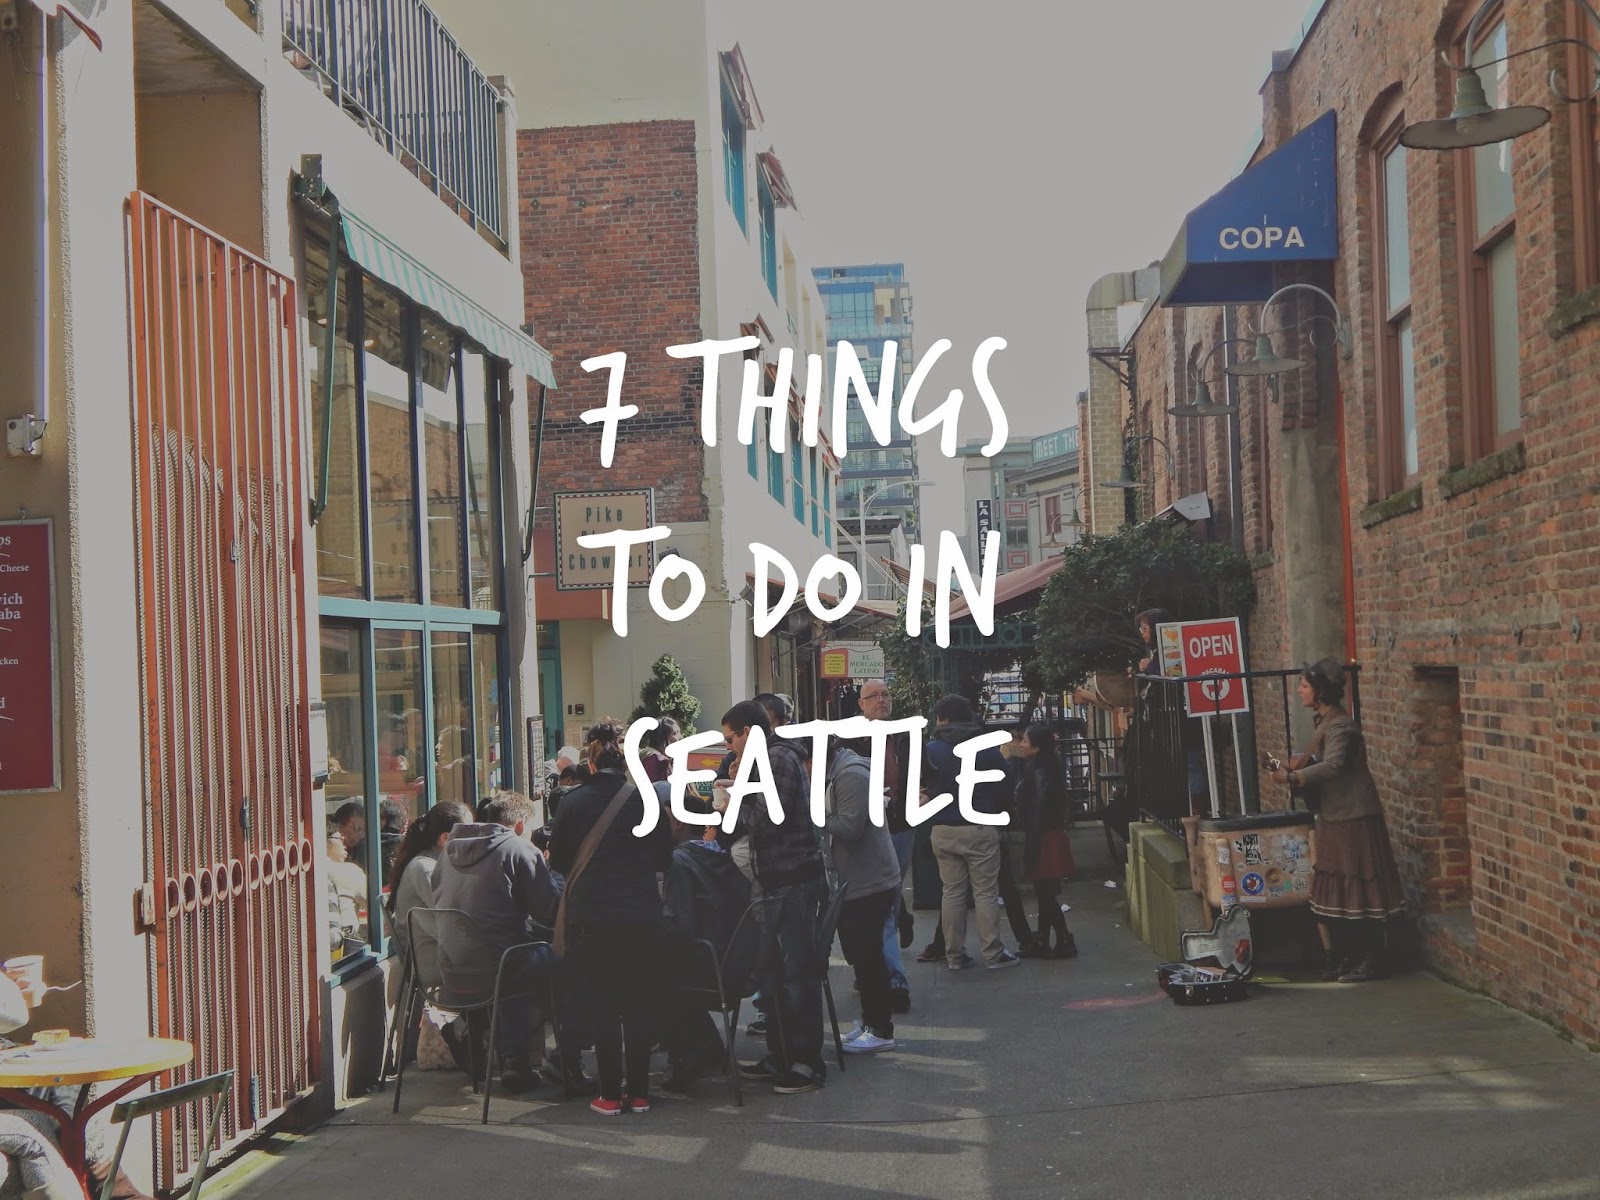 What are some things to do in Seattle?